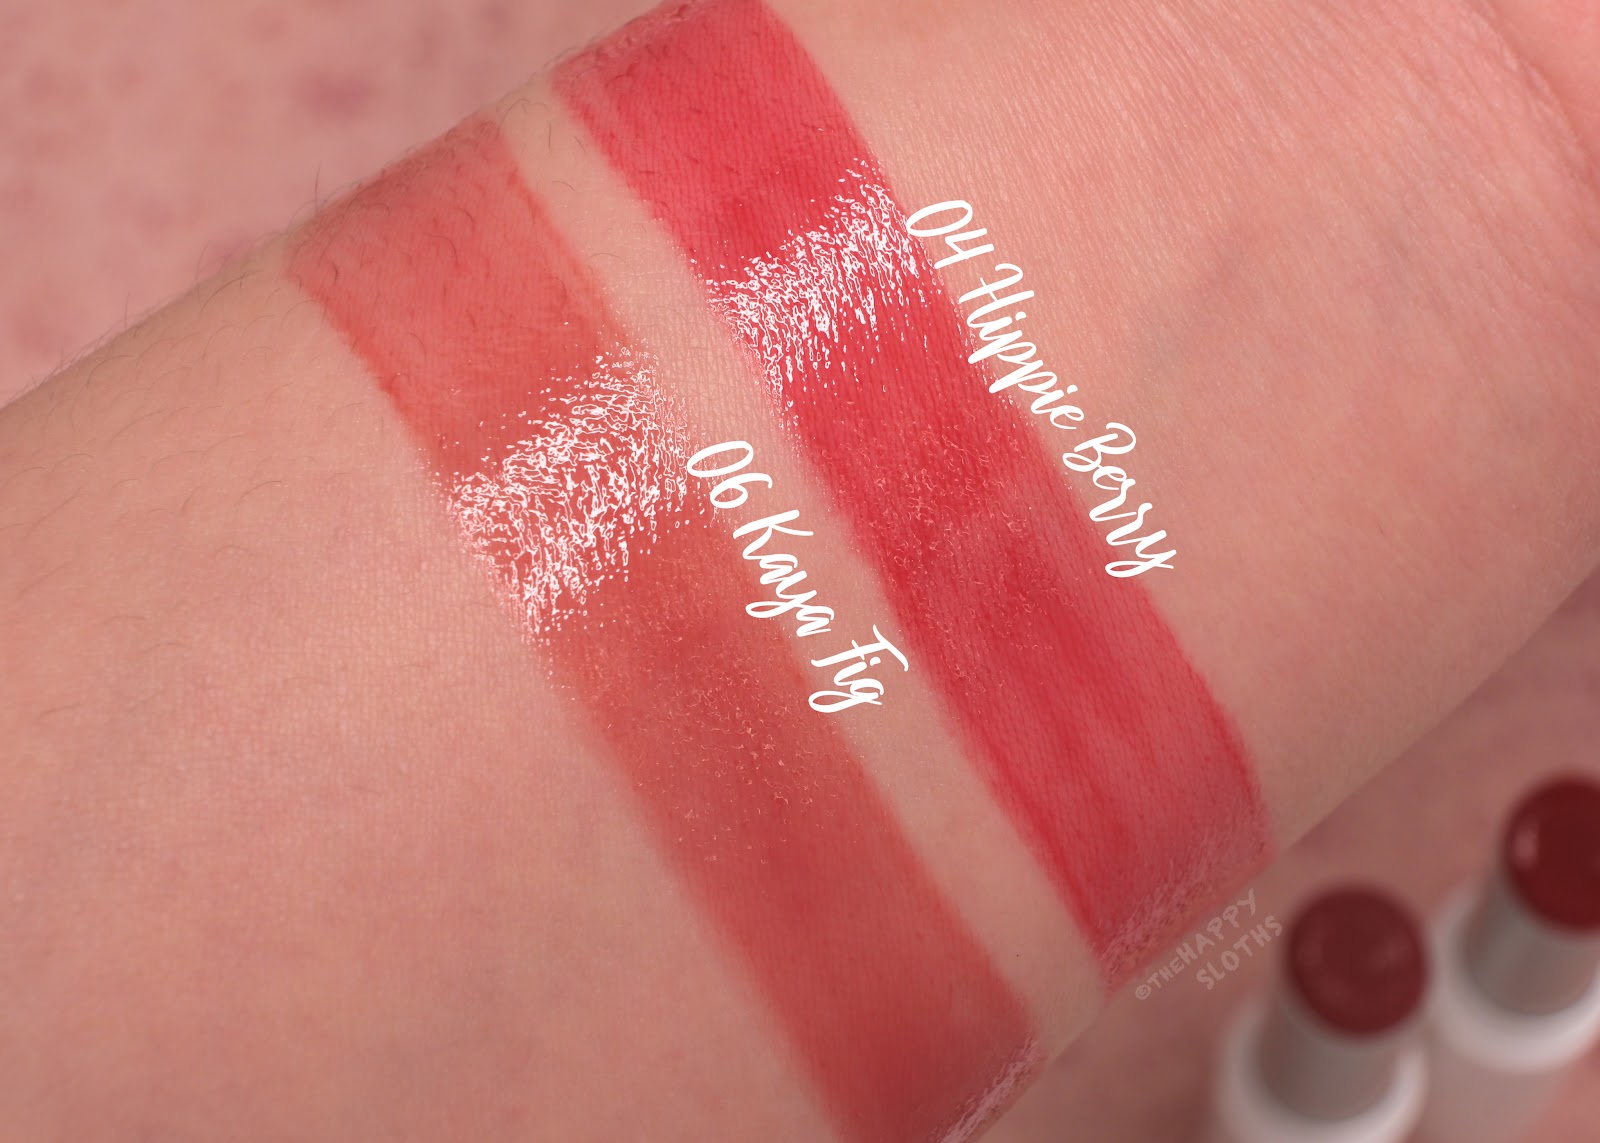 Romand | Glasting Melting Balm in "04 Hippie Berry" & "06 Kaya Fig": Review and Swatches